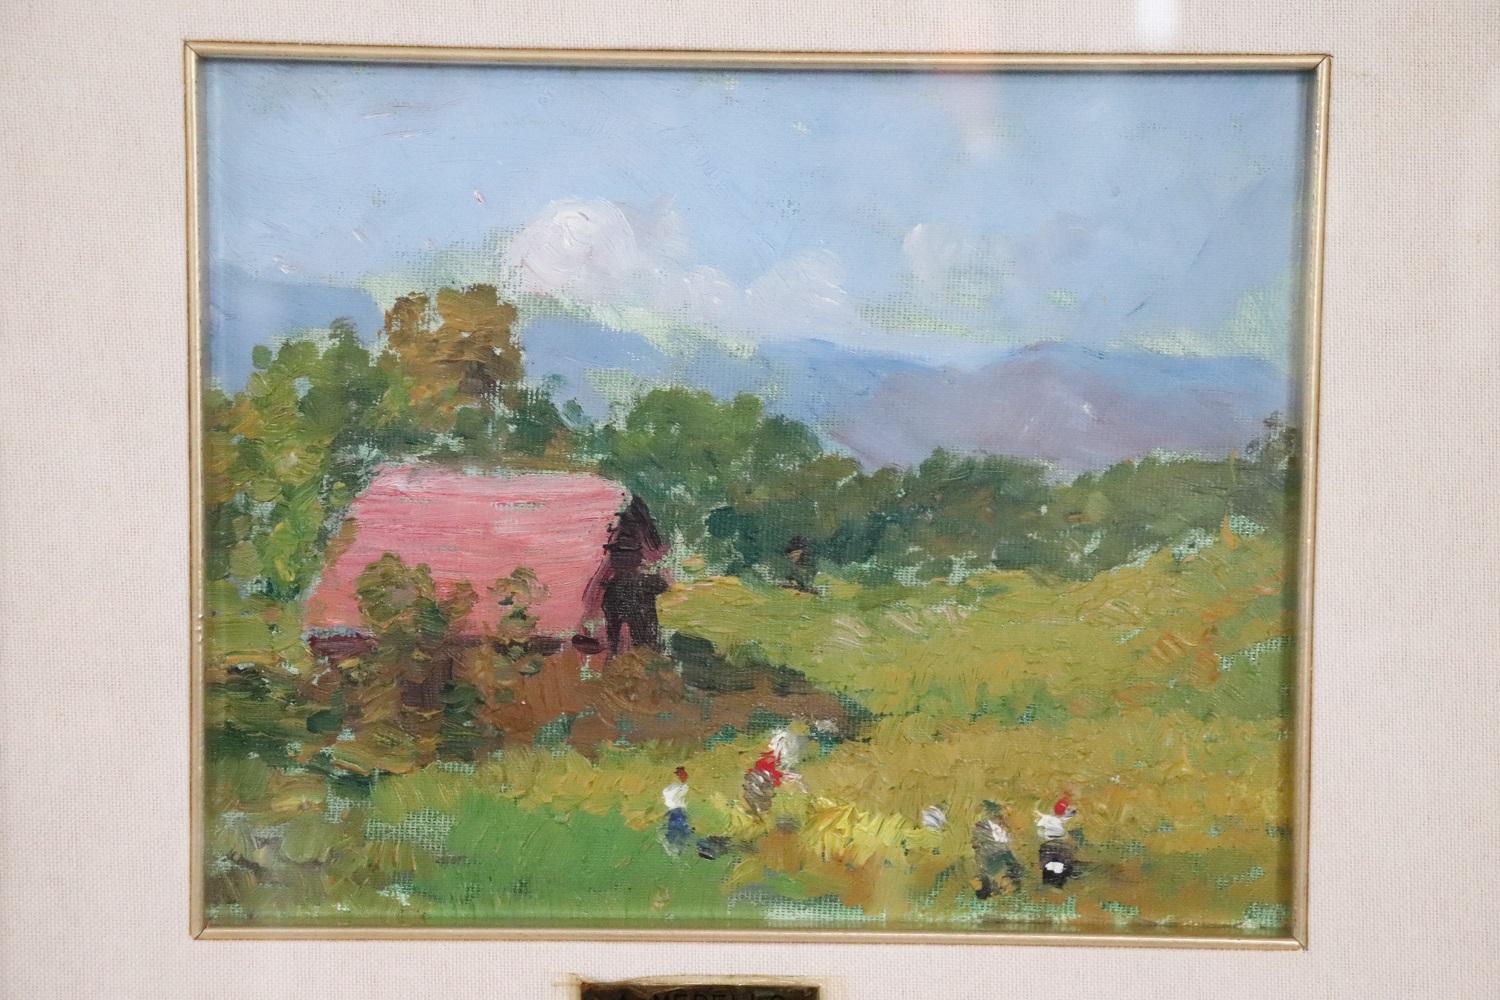 Beautiful oil painting on canvas 1960s. A splendid countryside landscape with peasants at work in the town of Fumeri, northern Italy. Signed by Amedeo Merello important italian artist. Perfect for collectors who love landscape painting. Excellent